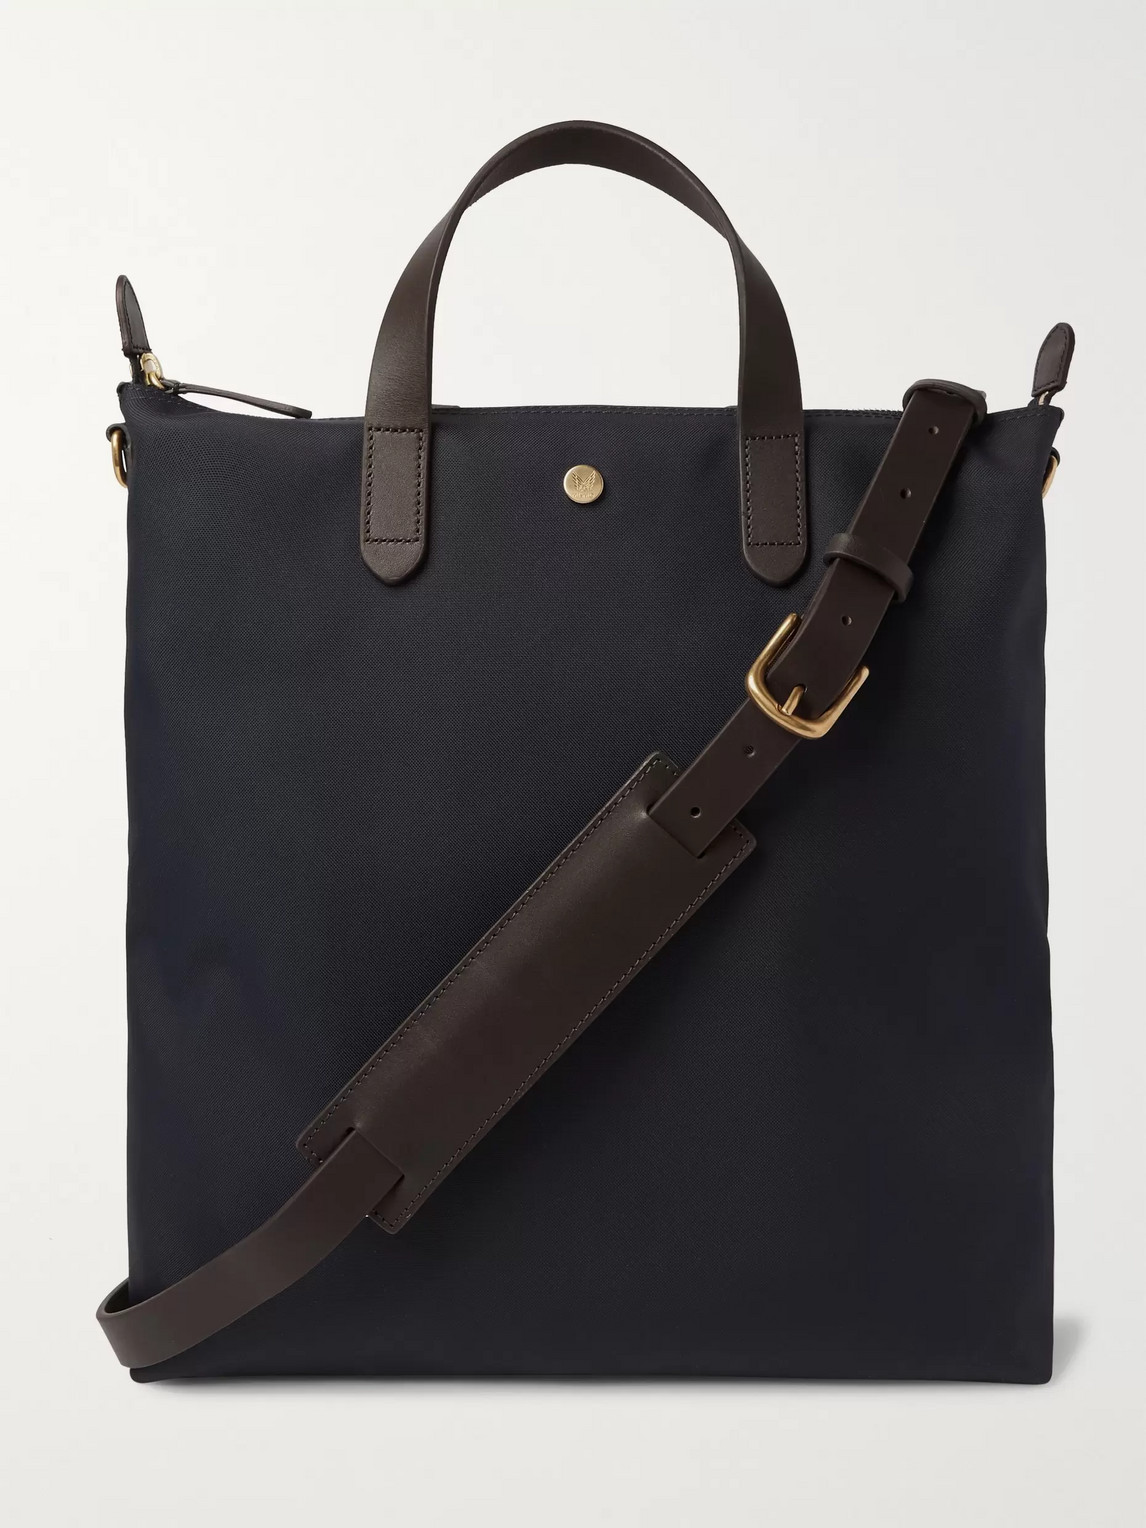 MISMO LEATHER-TRIMMED NYLON TOTE BAG